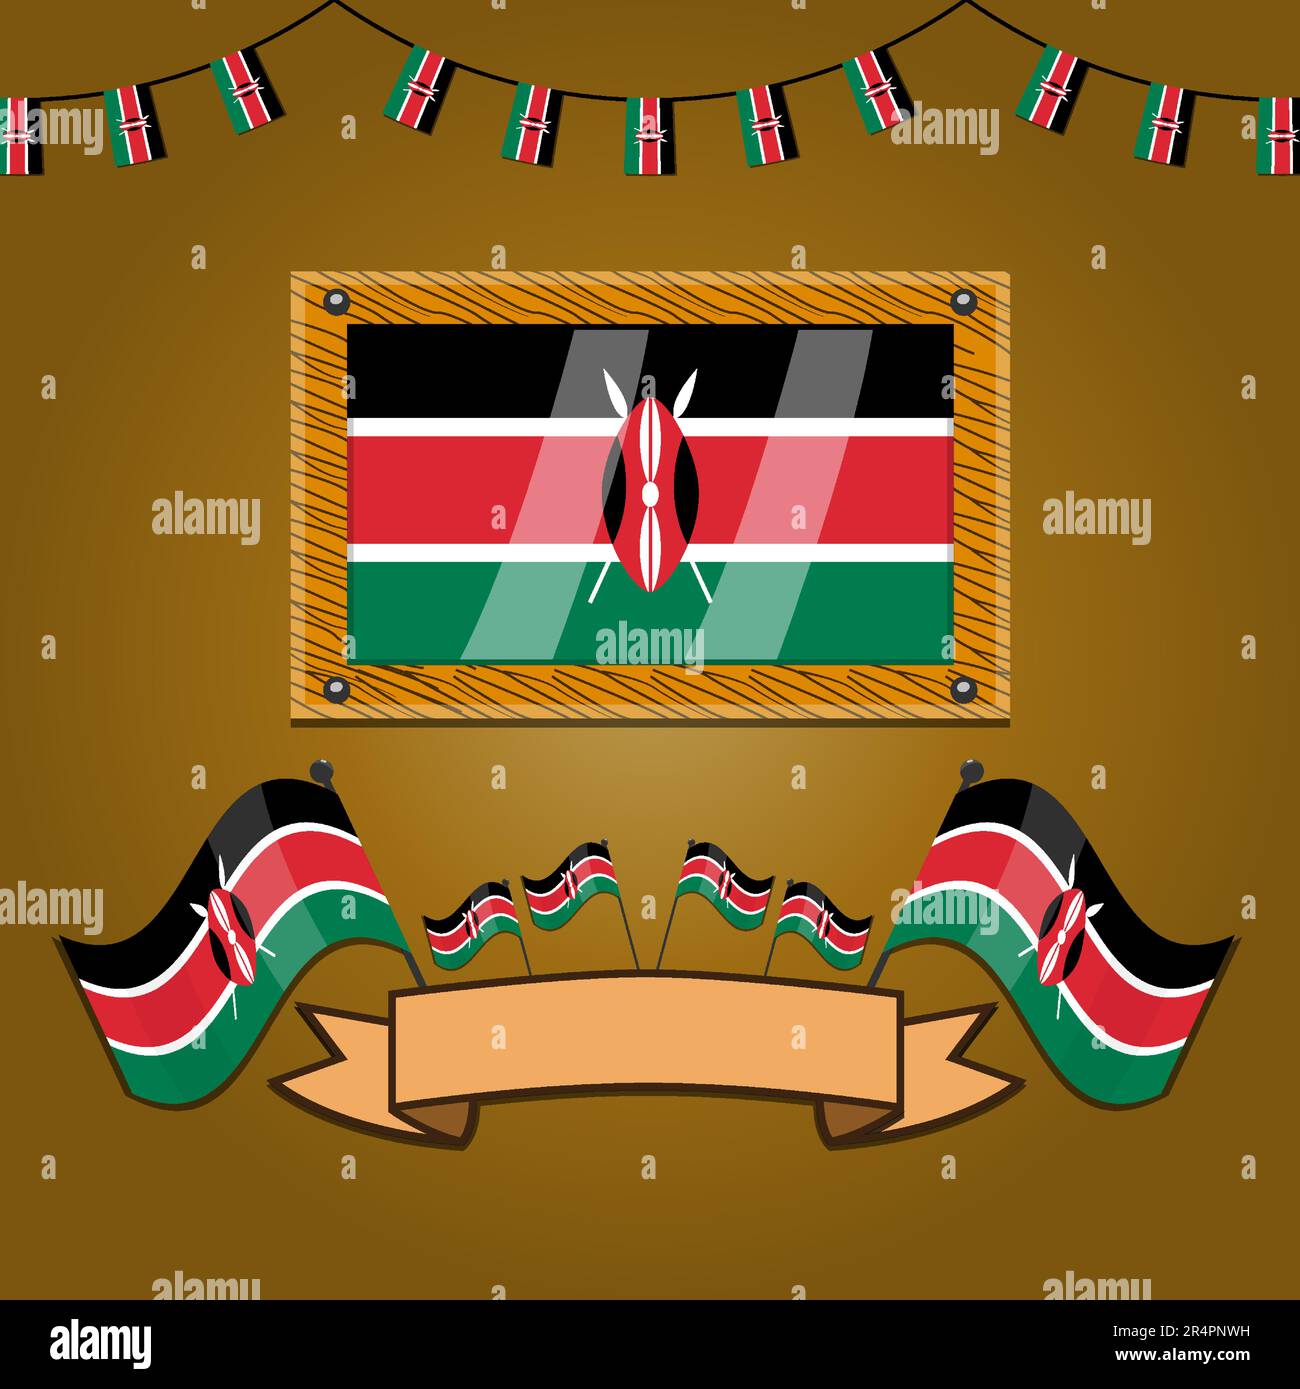 Kenya Flags On Frame Wood, Label, Simple Gradient and Vector Illustration Stock Vector